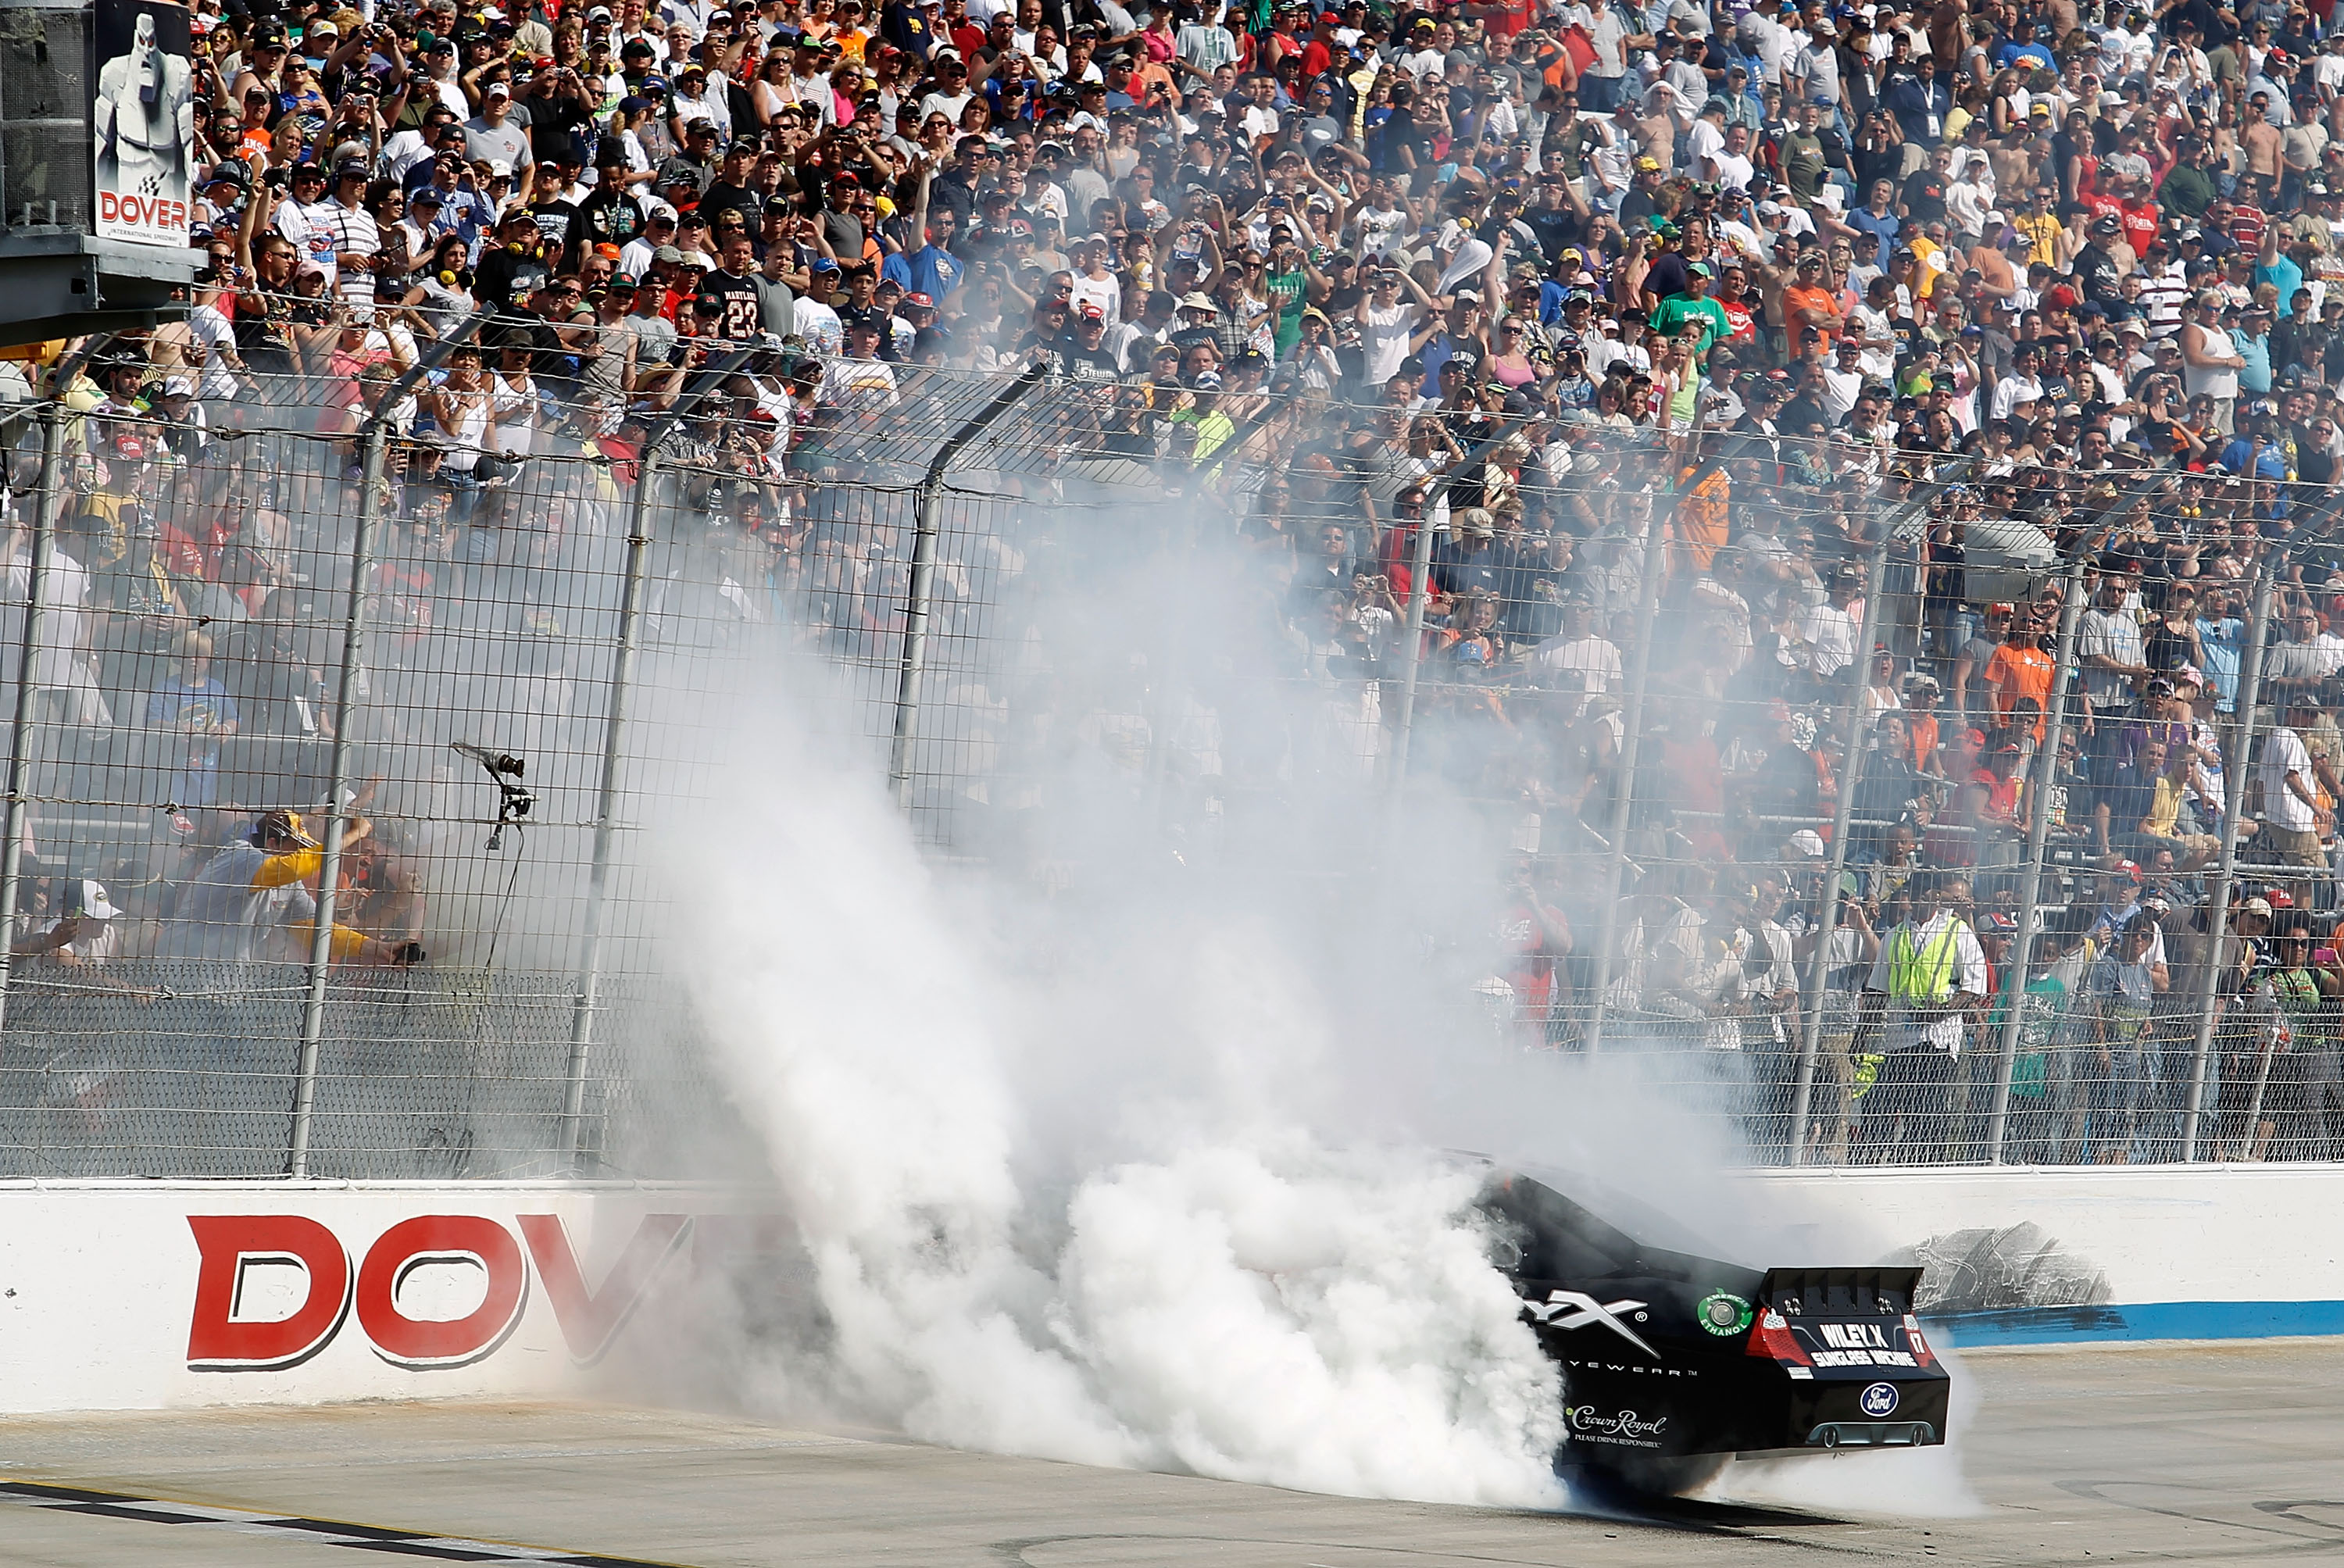 DOVER, DE - MAY 15:  Matt Kenseth, driver of the #17 Wiley X Sunglasses Ford, celebrates with a burnout after winning the NASCAR Sprint Cup Series FedEx 400 Benefiting Autism Speaks at Dover International Speedway on May 15, 2011 in Dover, Delaware.  (Pho